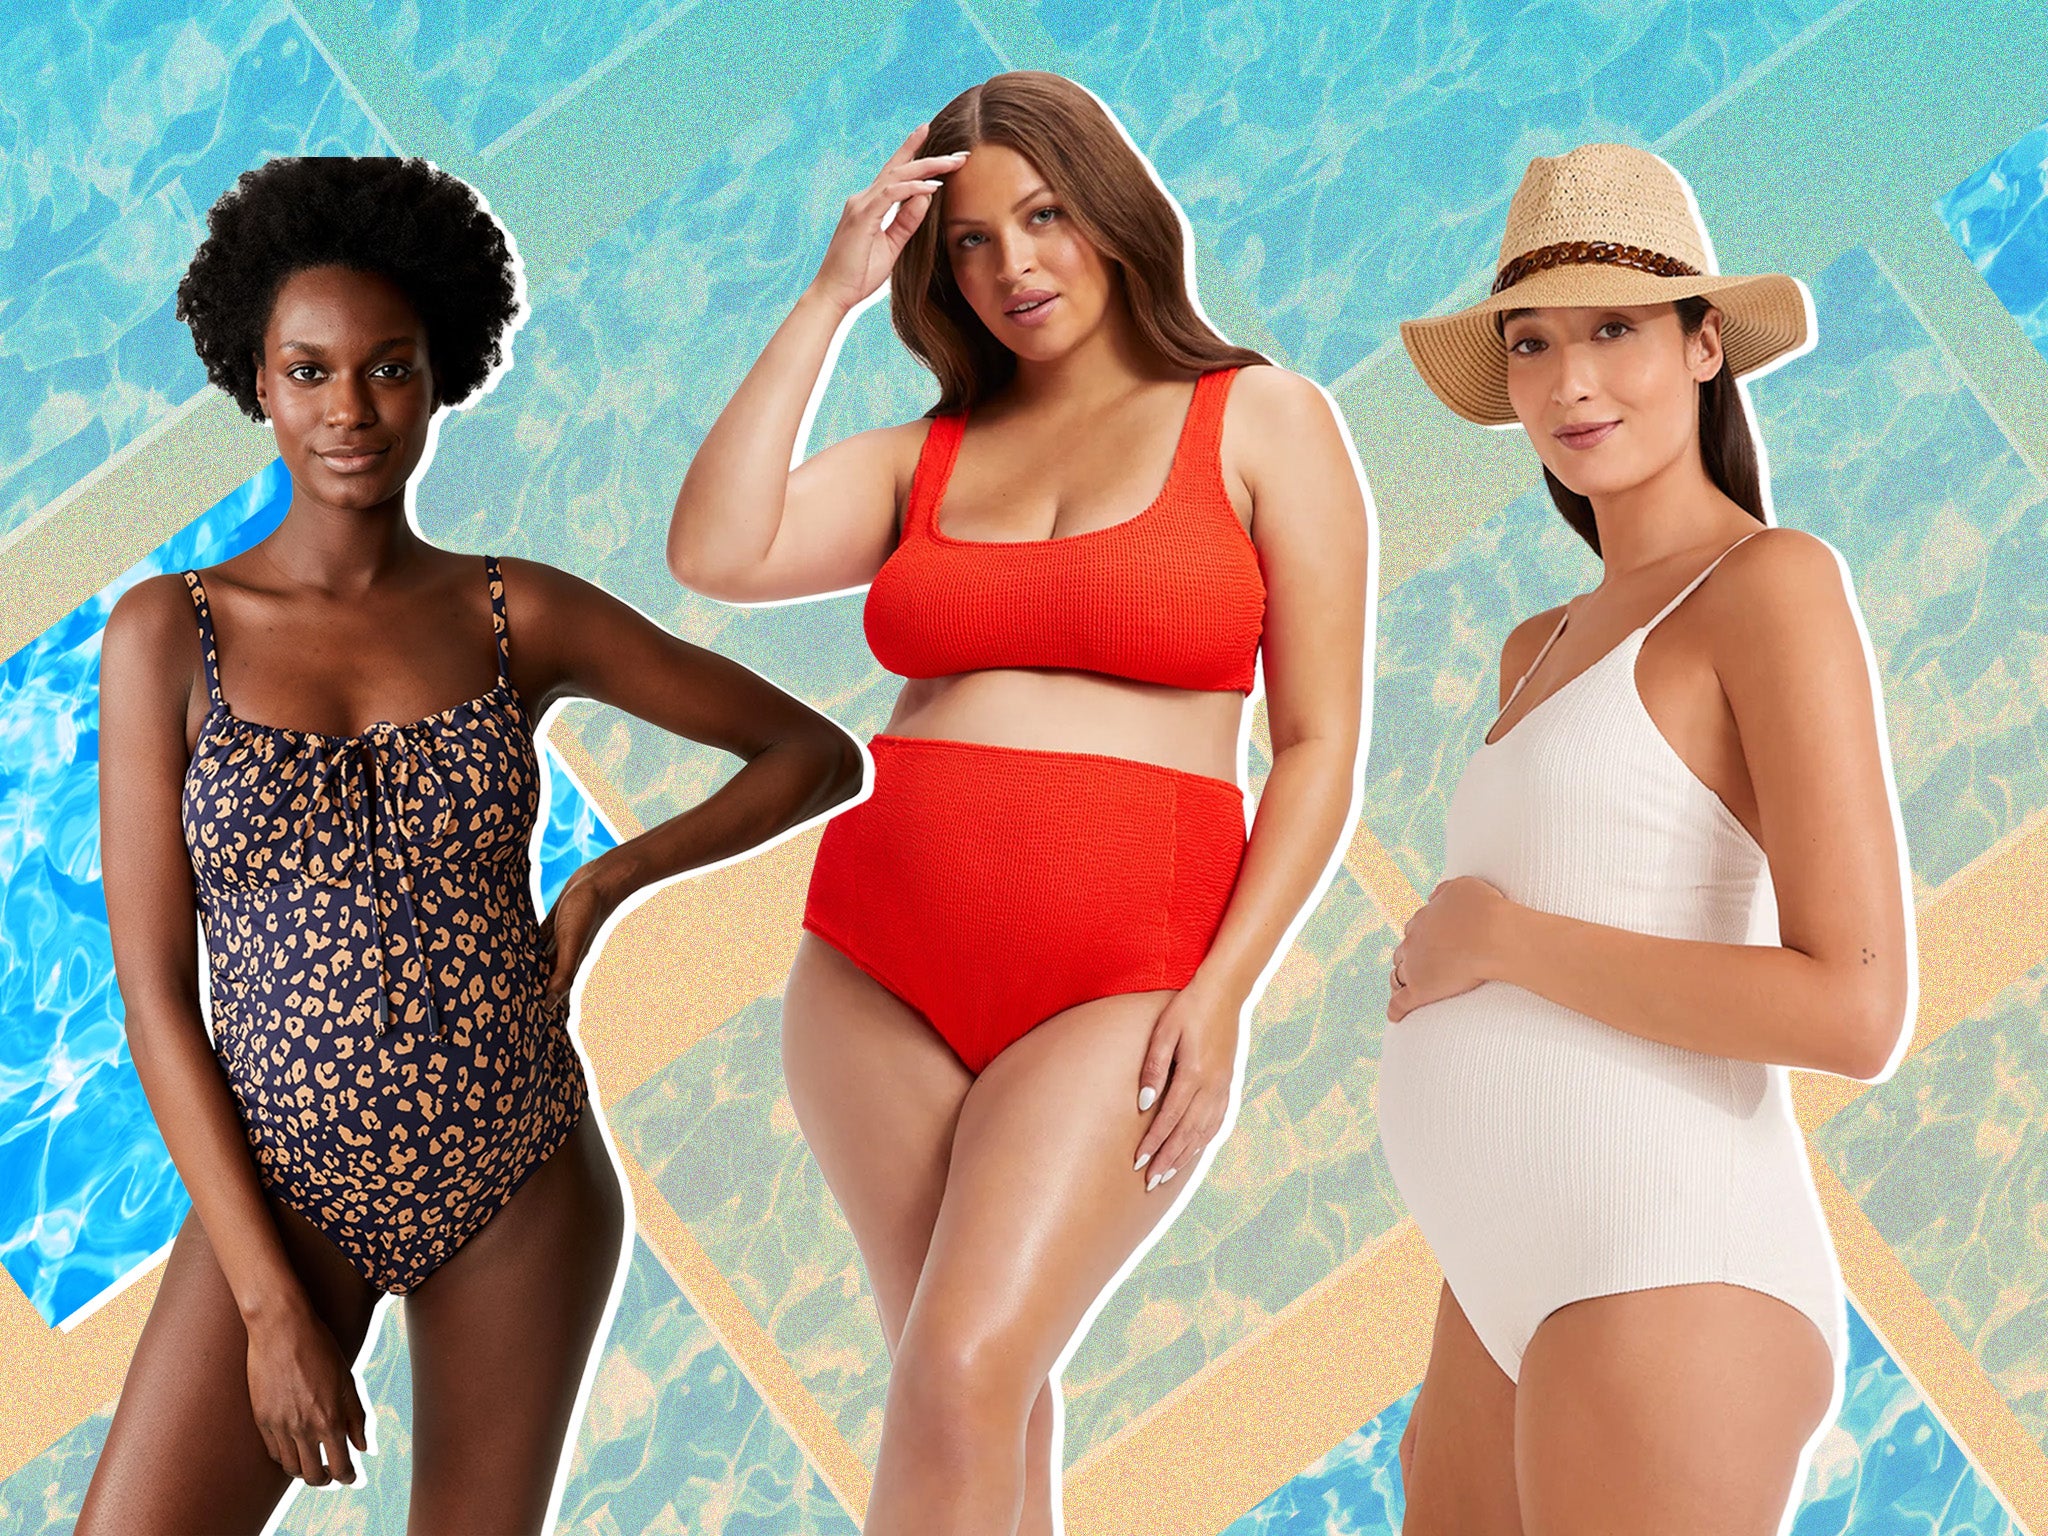 The perfect swimwear needs to offer support as well as room for your bump and body to grow